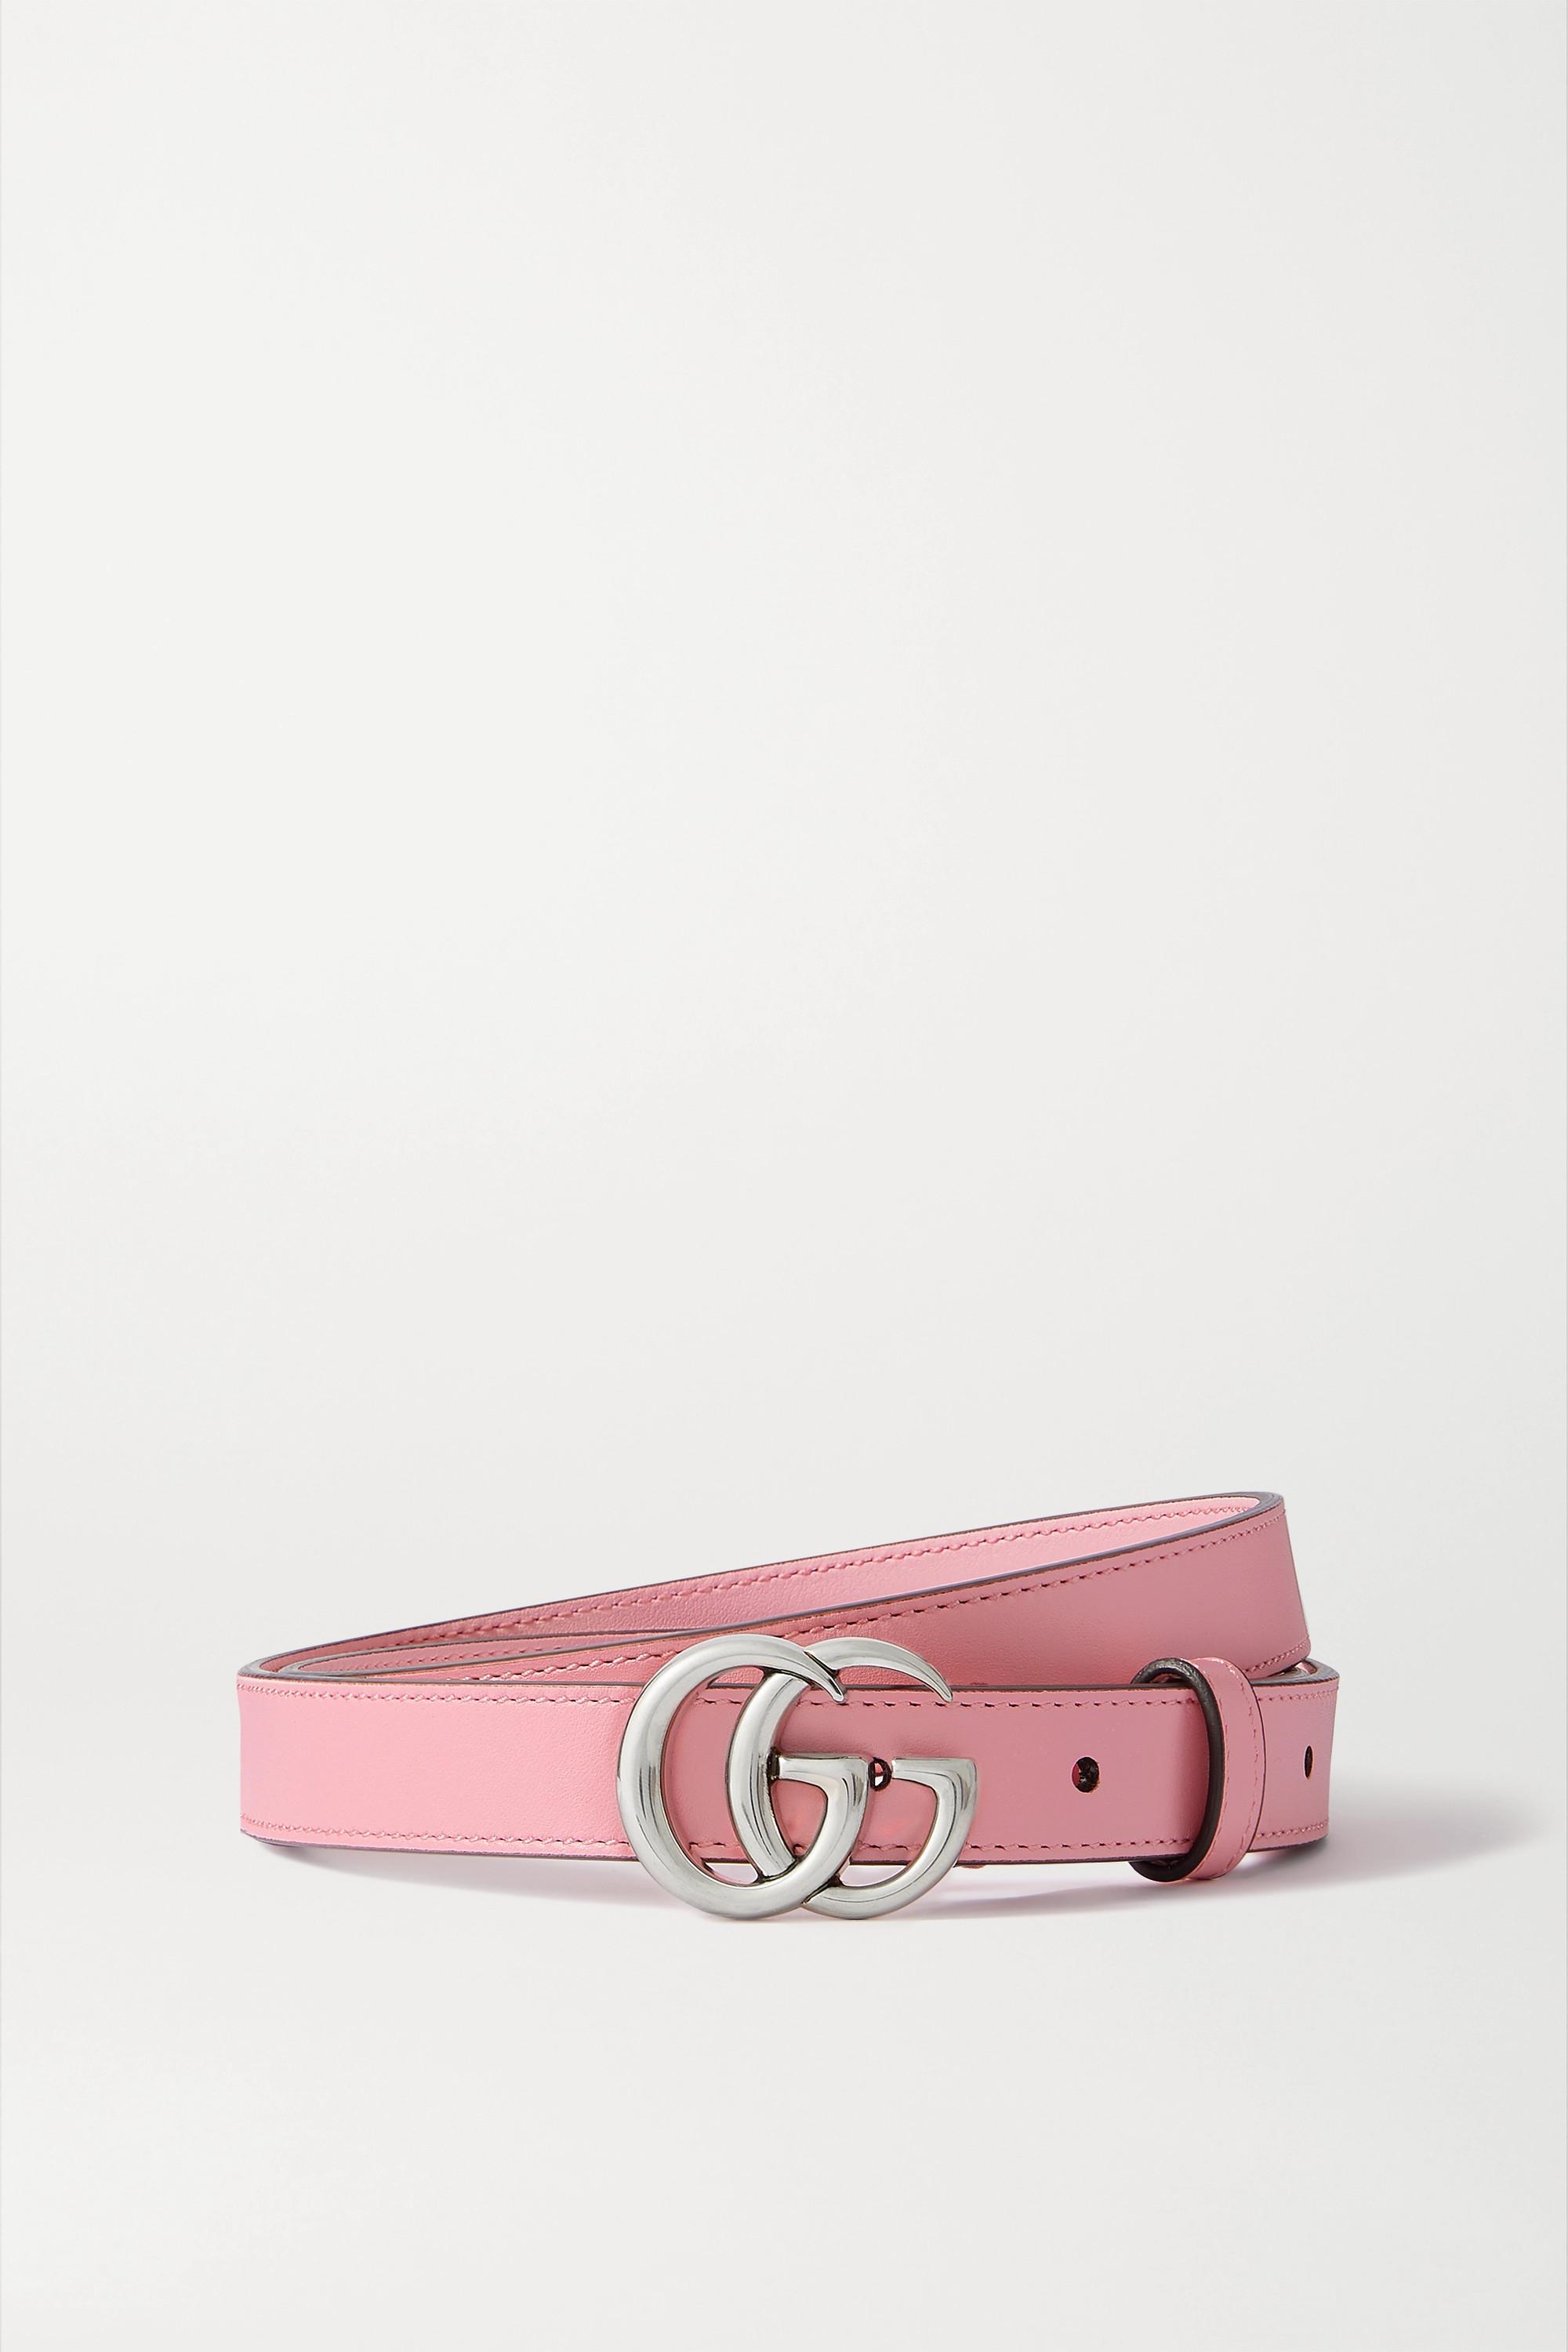 Gucci Thin Belt With Double G Buckle in 